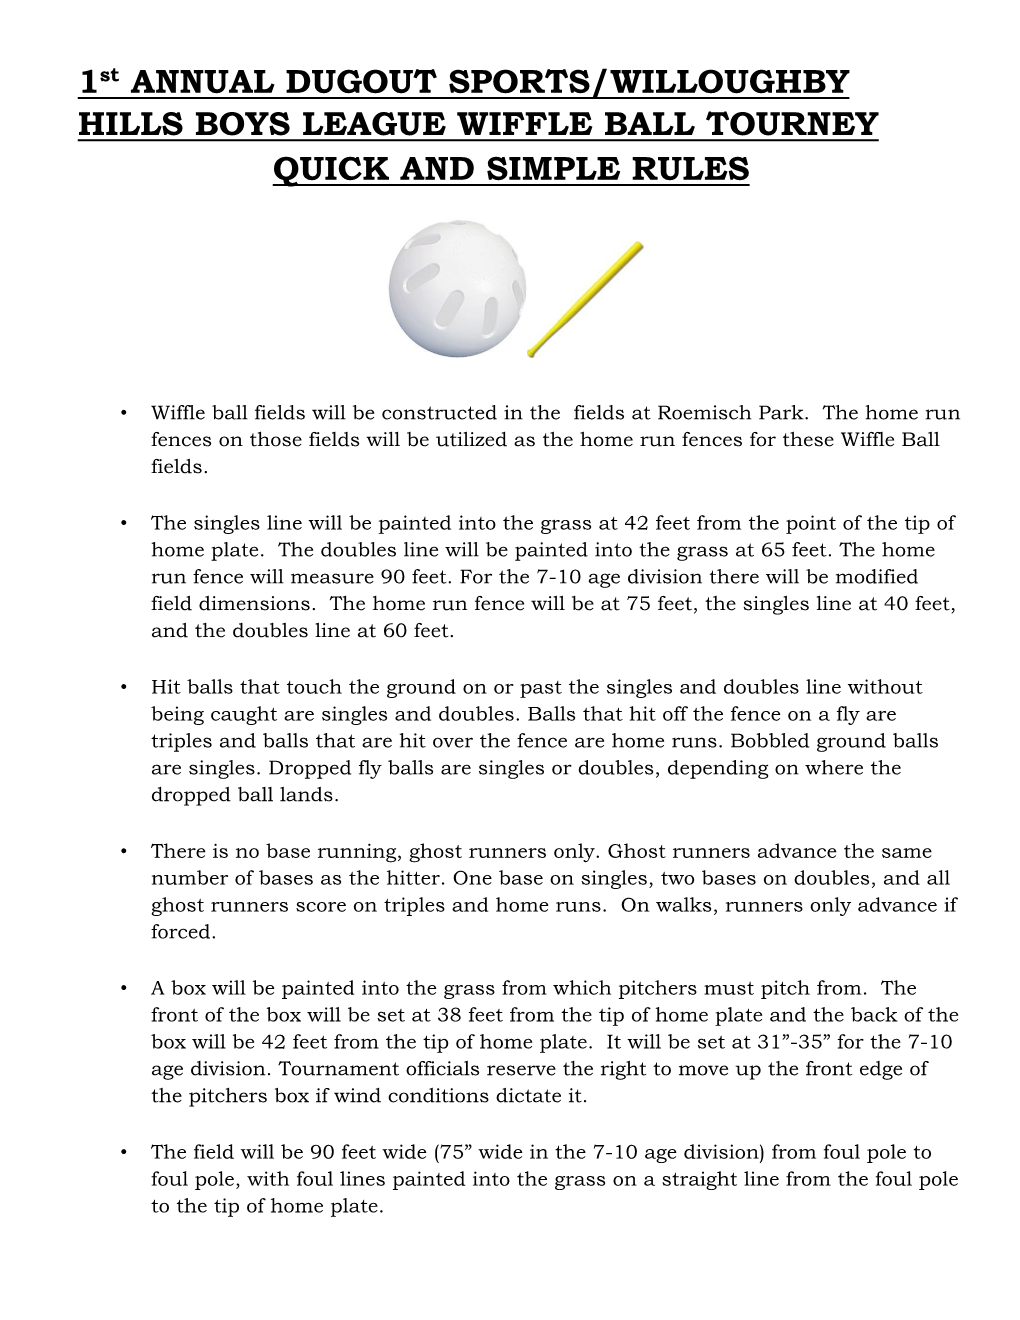 1St ANNUAL DUGOUT SPORTS/WILLOUGHBY HILLS BOYS LEAGUE WIFFLE BALL TOURNEY QUICK and SIMPLE RULES